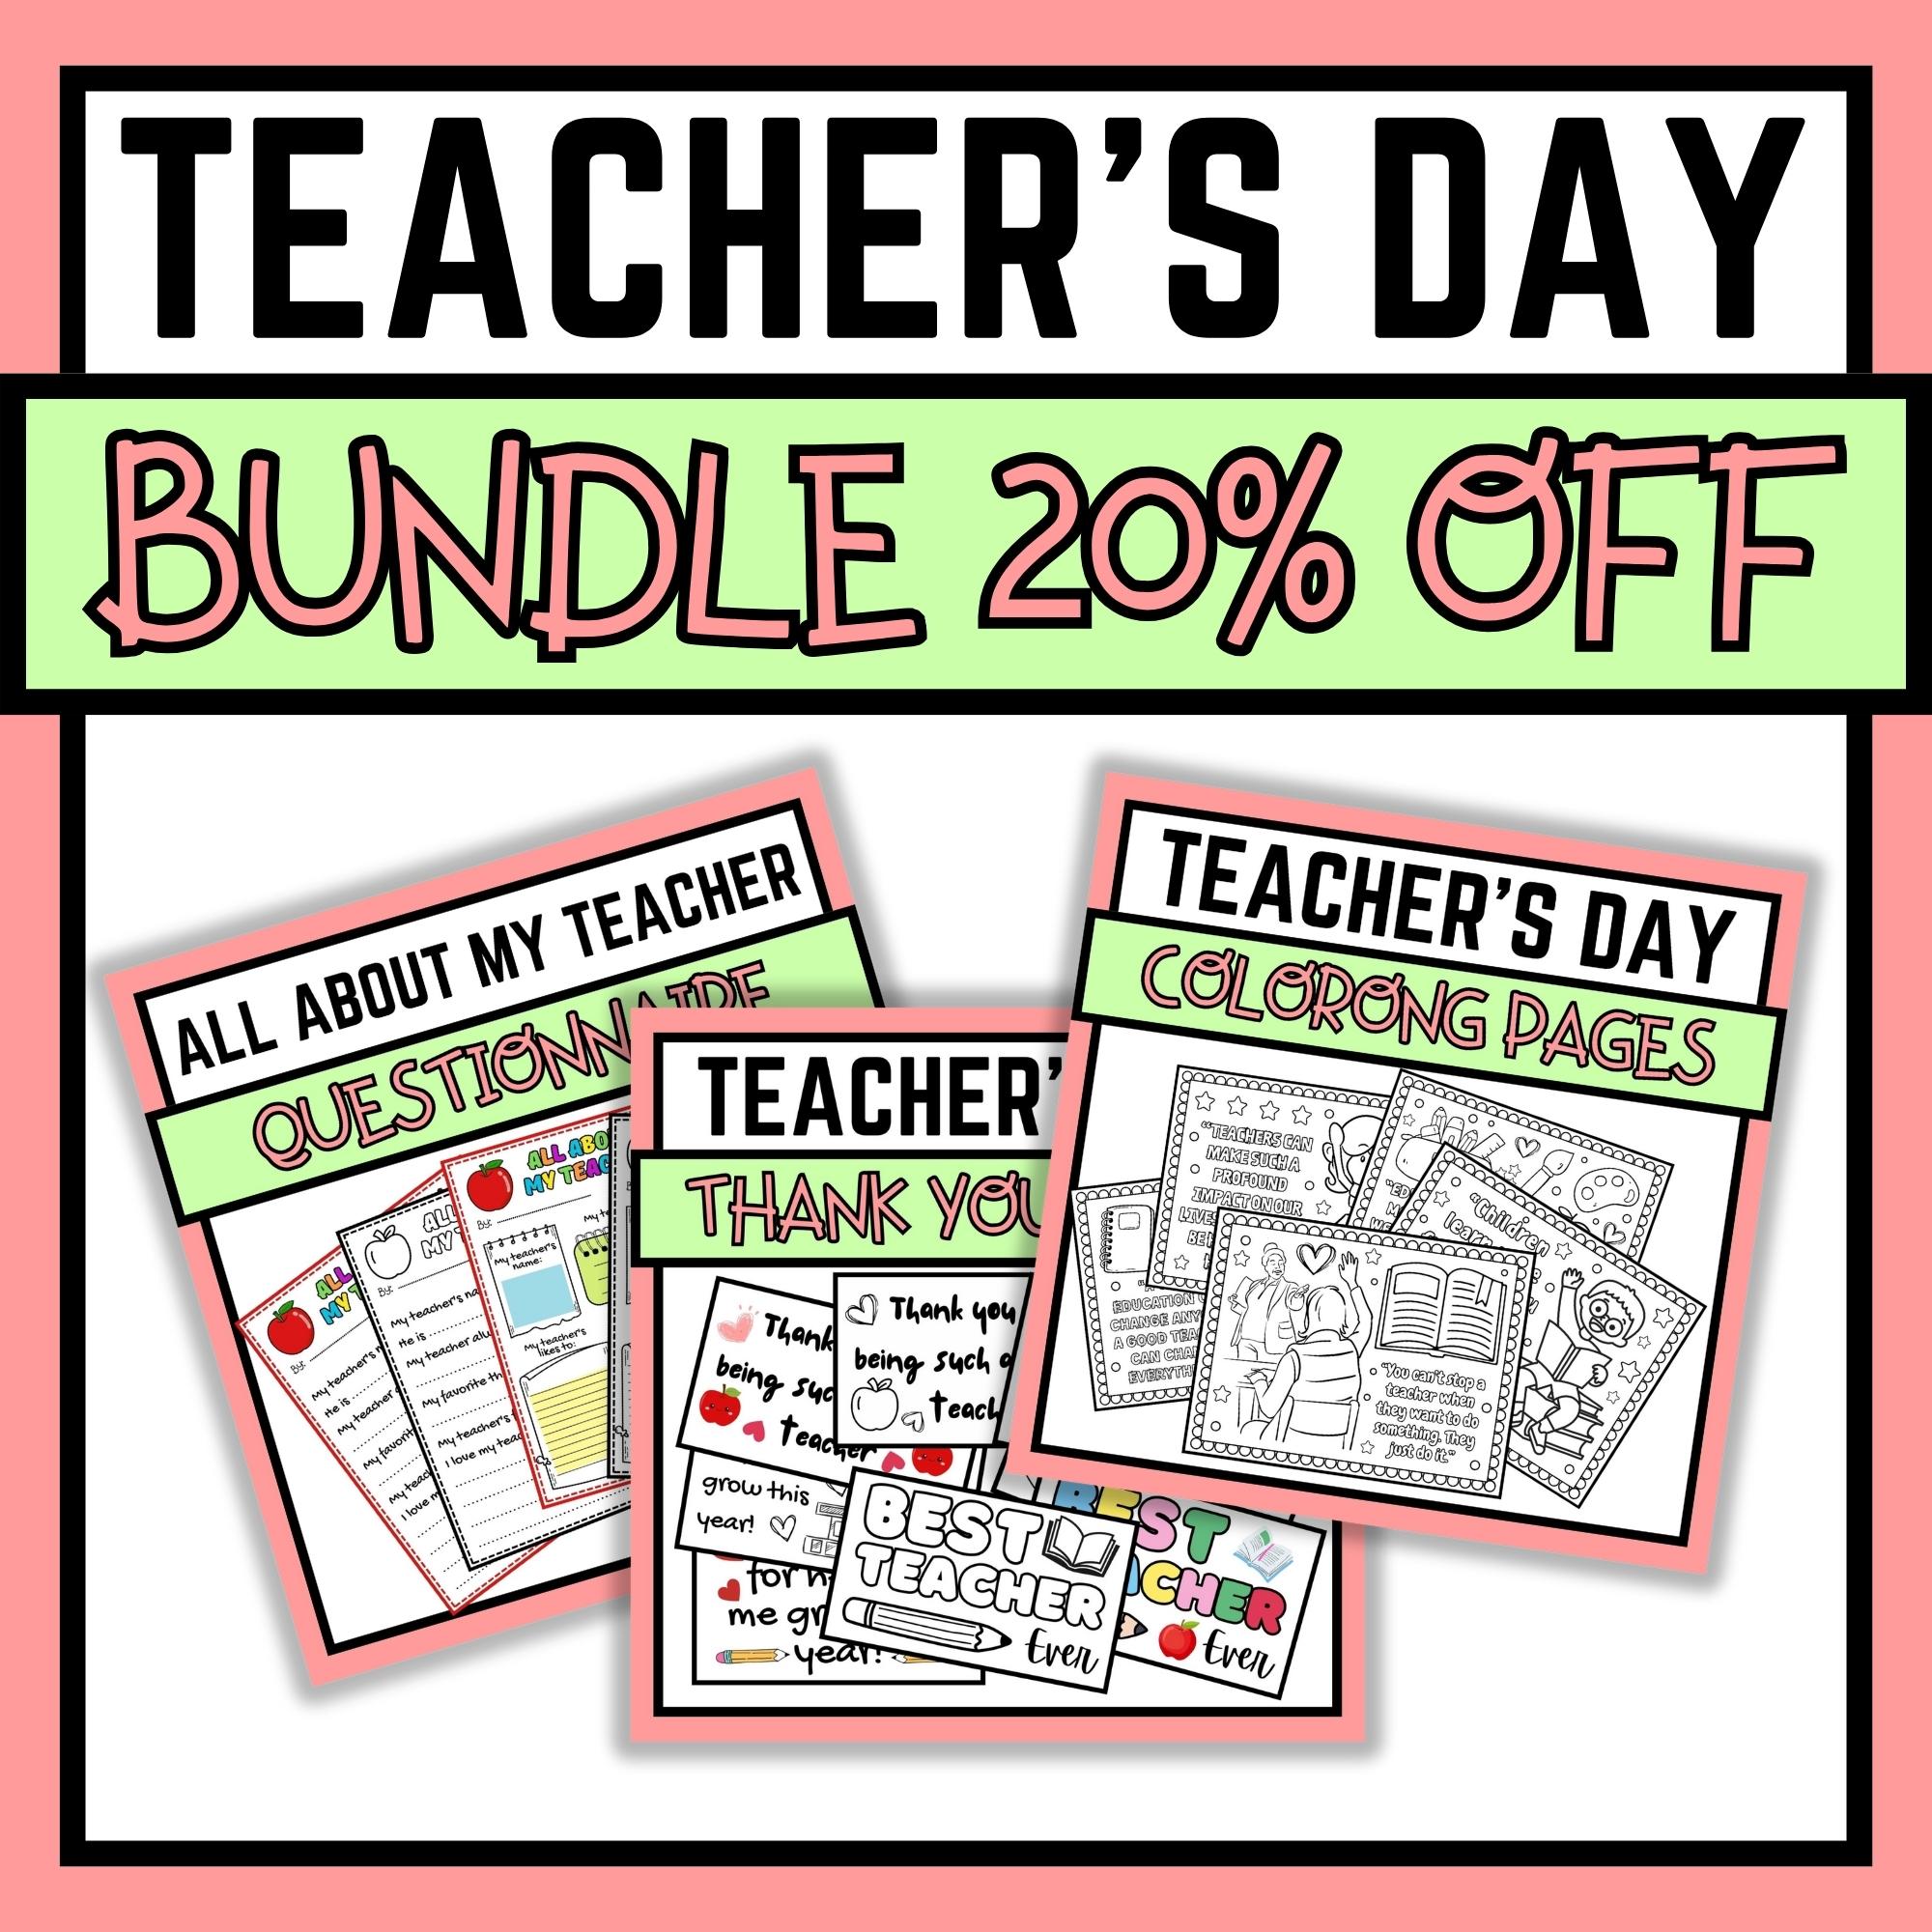 Teachers day bundle off coloring pages thank you cards and more made by teachers